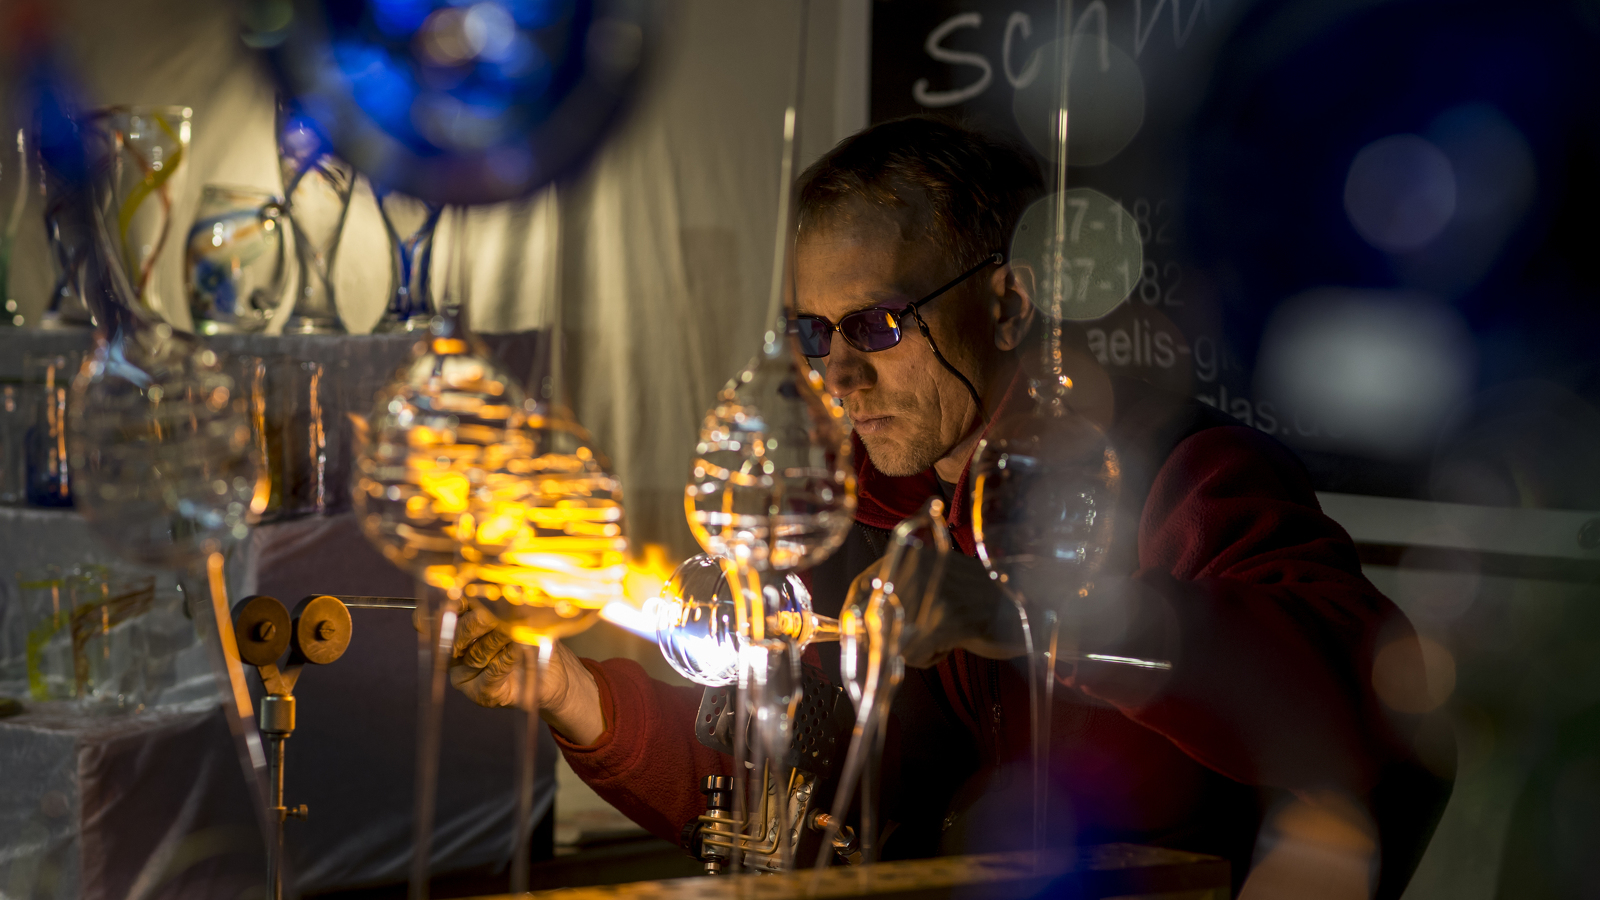 A glassmaker at work at the Christmas market in Kempten